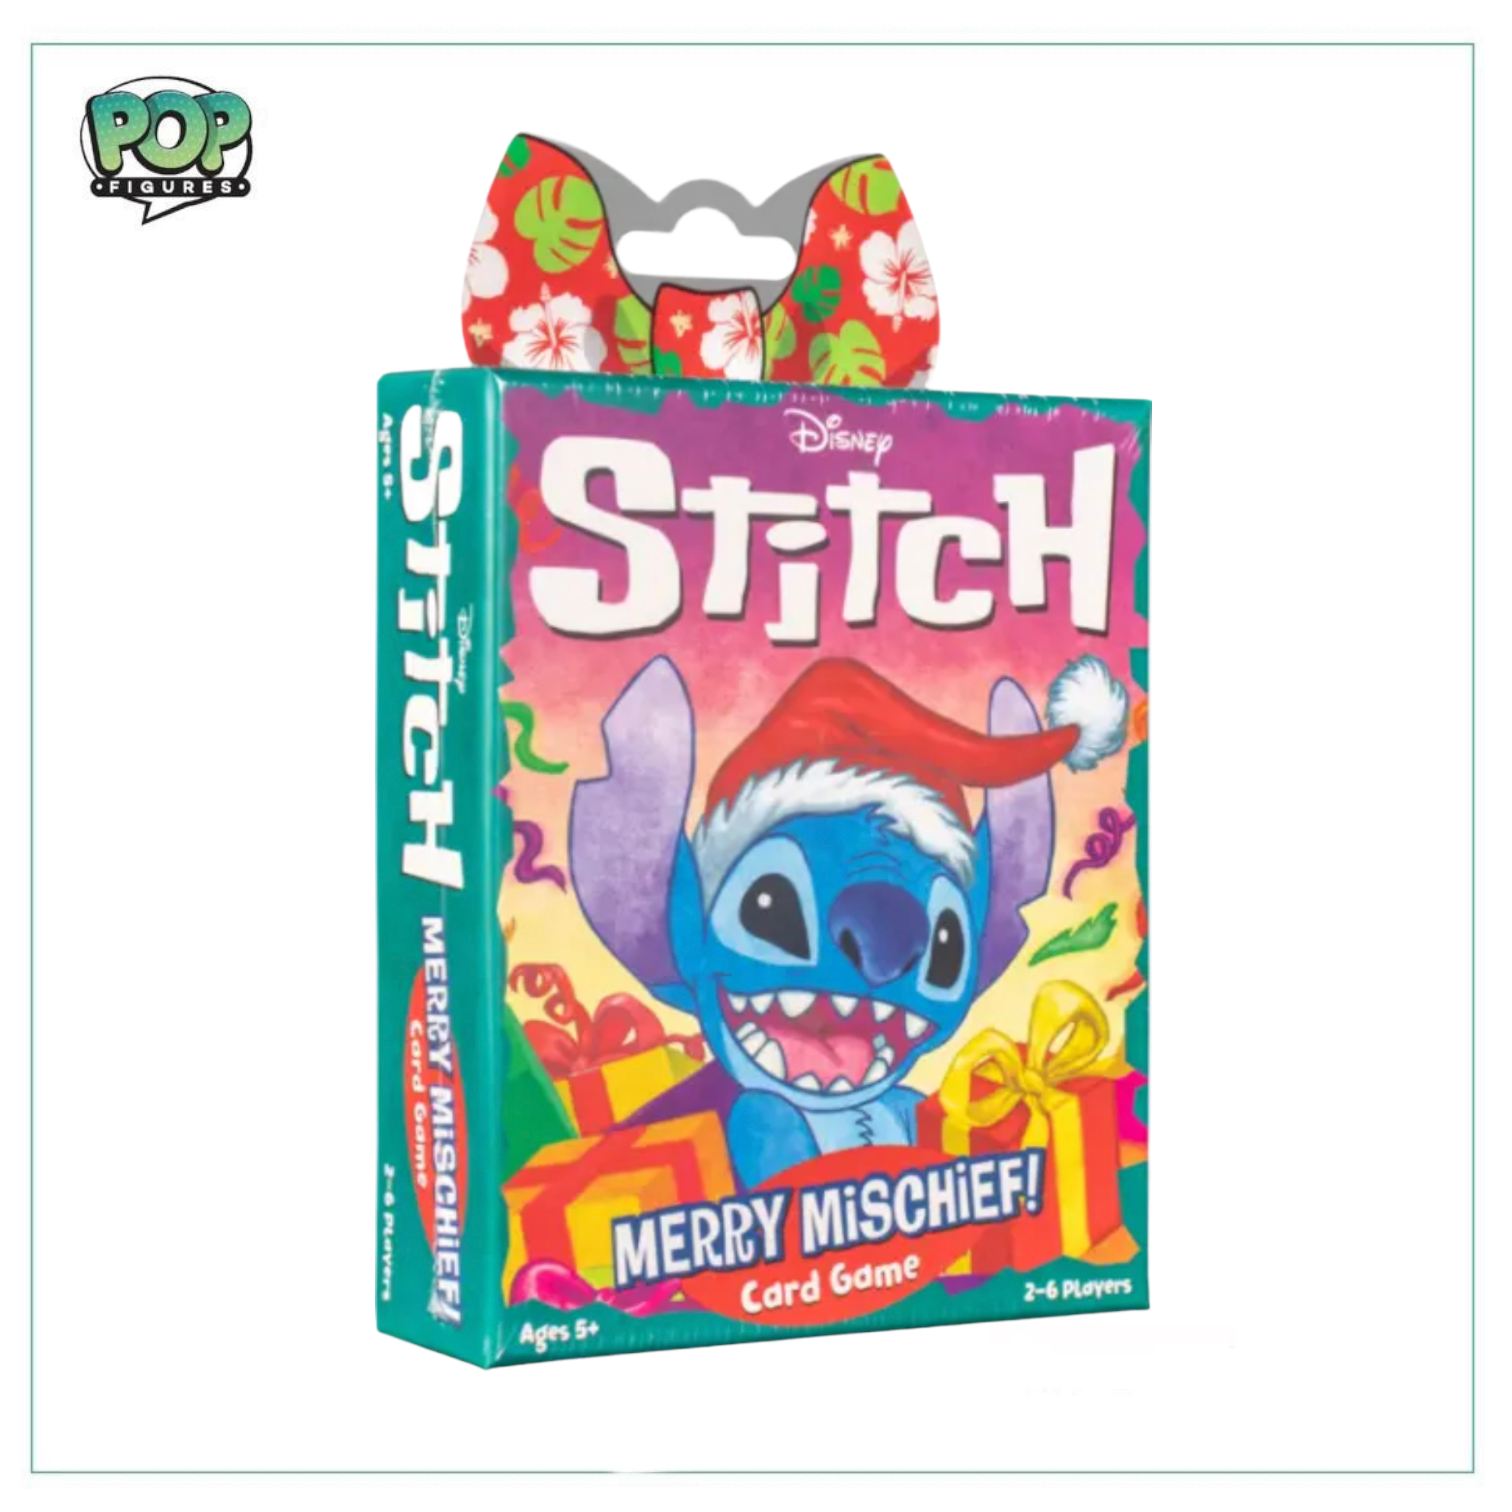 Stitch - Merry Mischief Funko Card Game! - Disney - Angry Cat